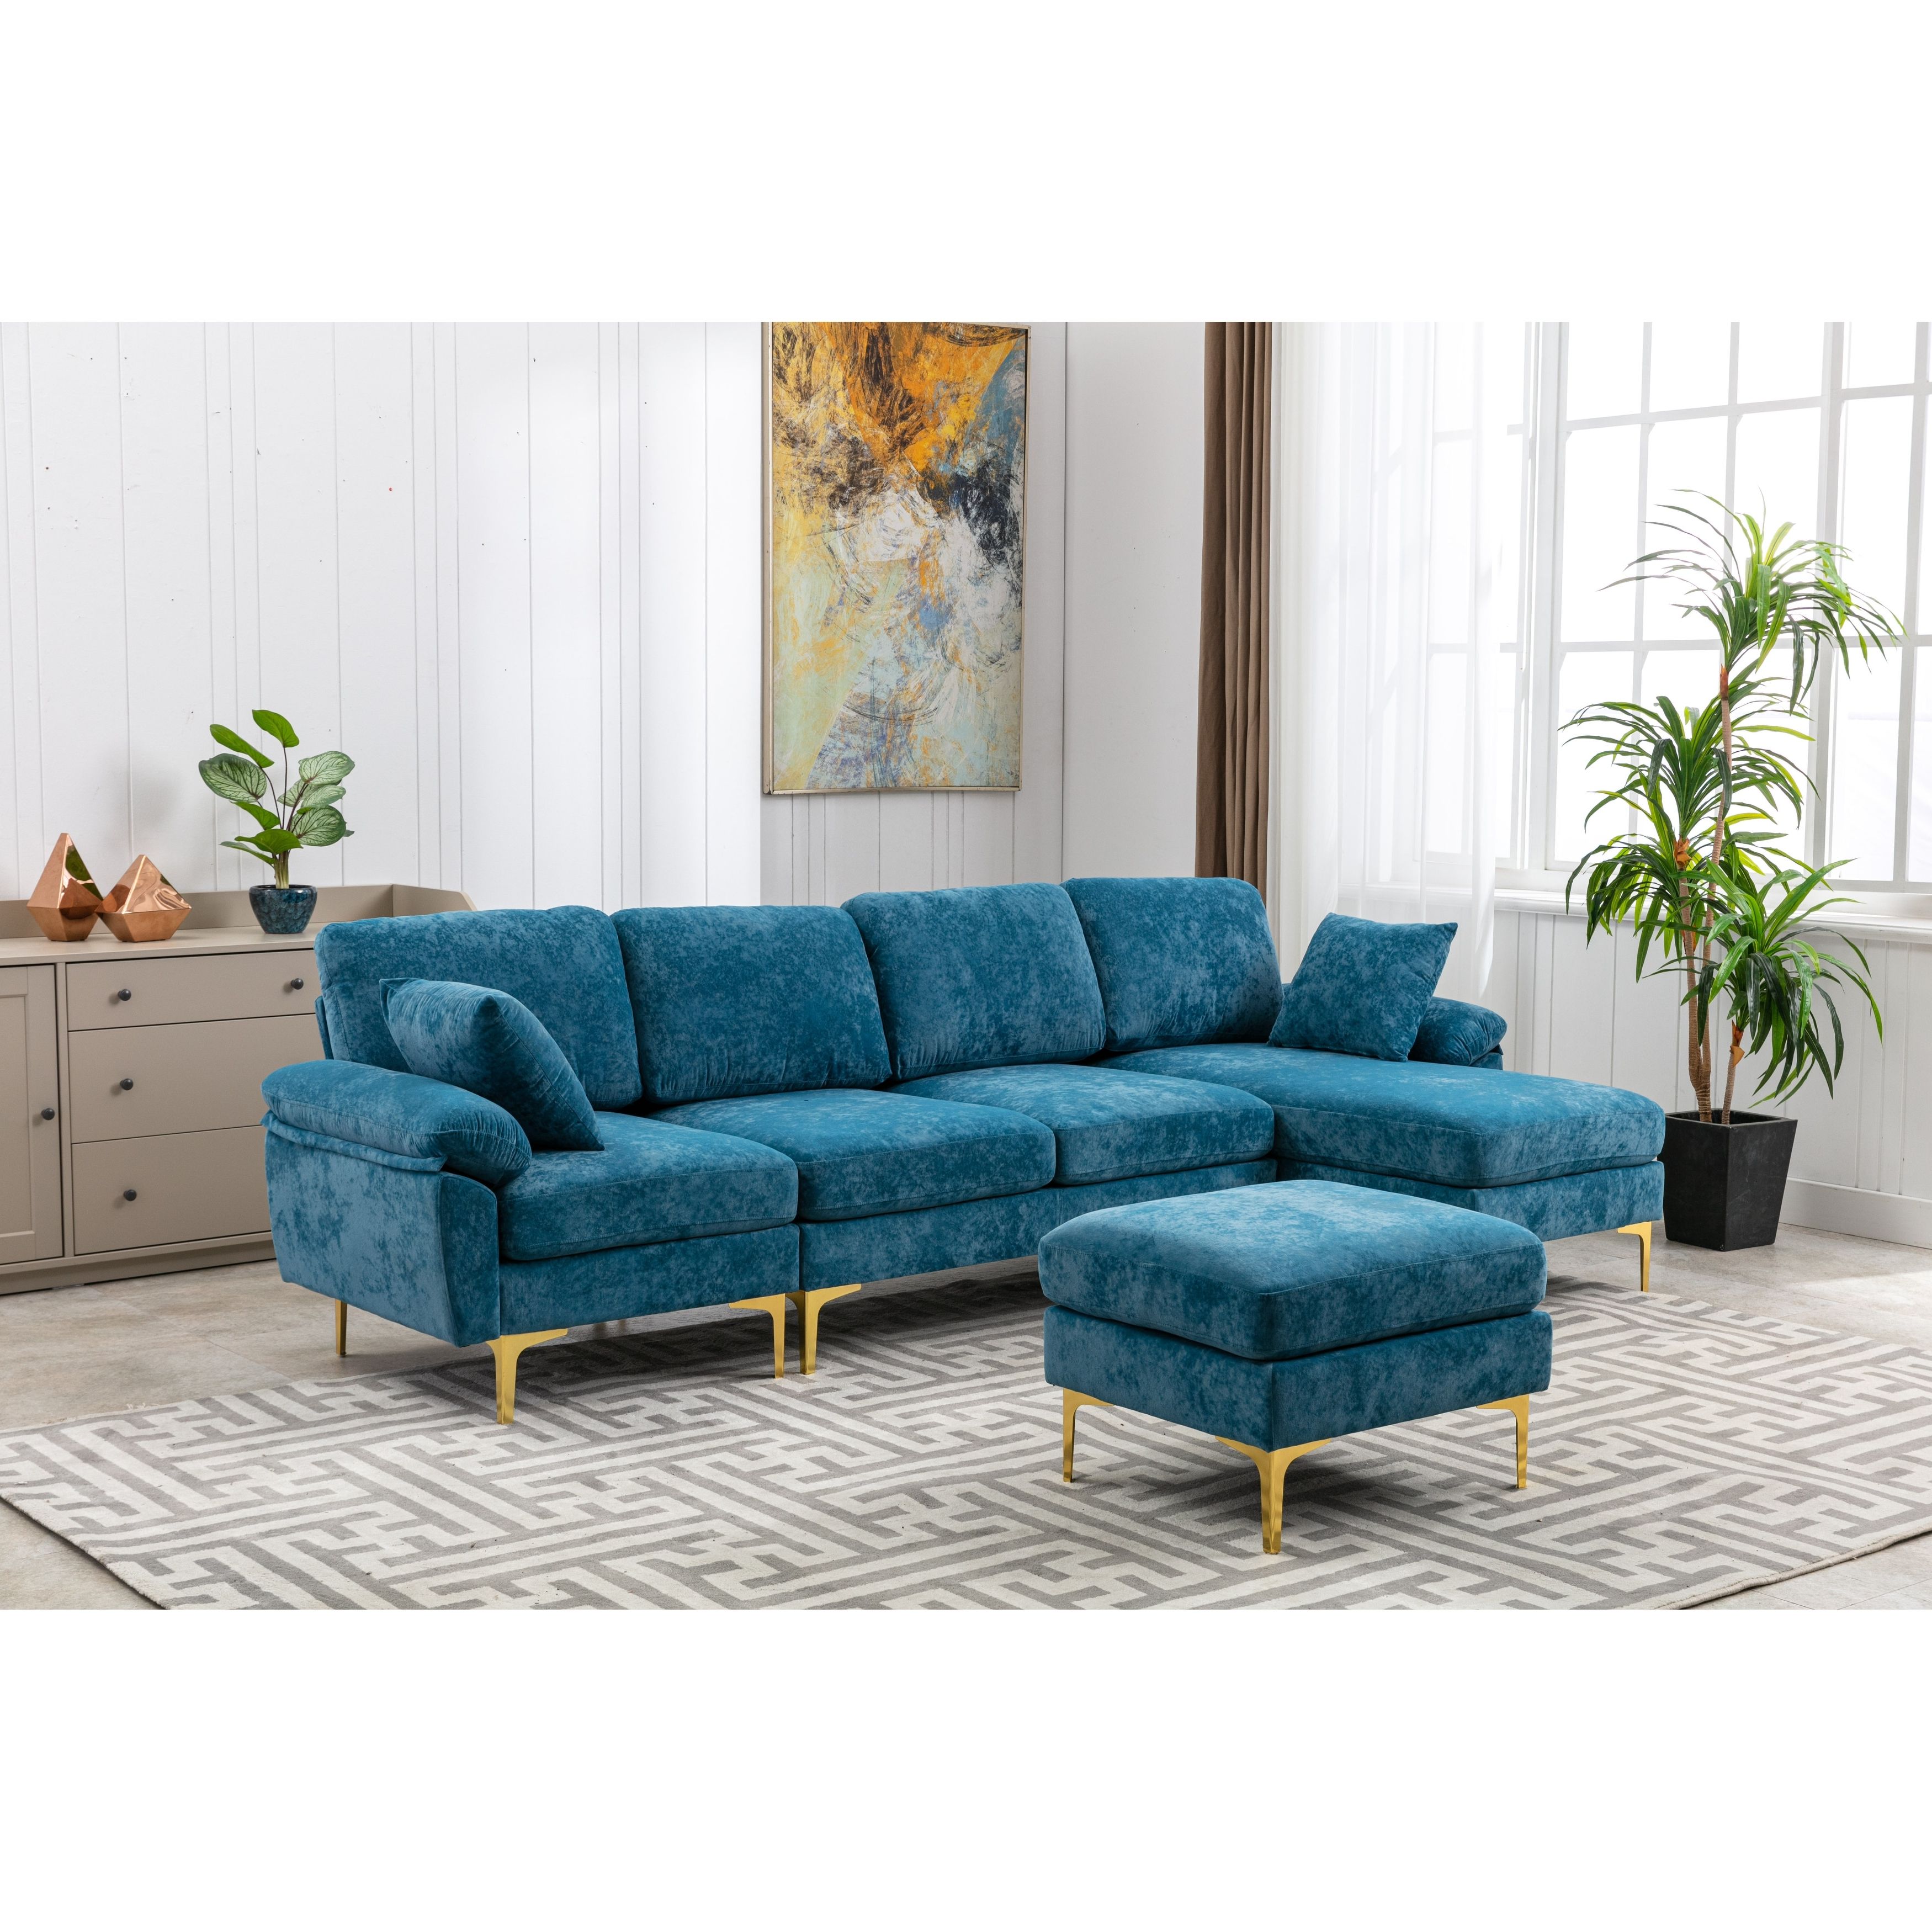 Living Room Sectional Sofa, L Shaped Upholstered Couch With Movable Ottoman,  Convertible Modular Sofa With Gold Metal Legs – – 36690154 Regarding Sectional Sofas With Movable Ottoman (View 8 of 20)